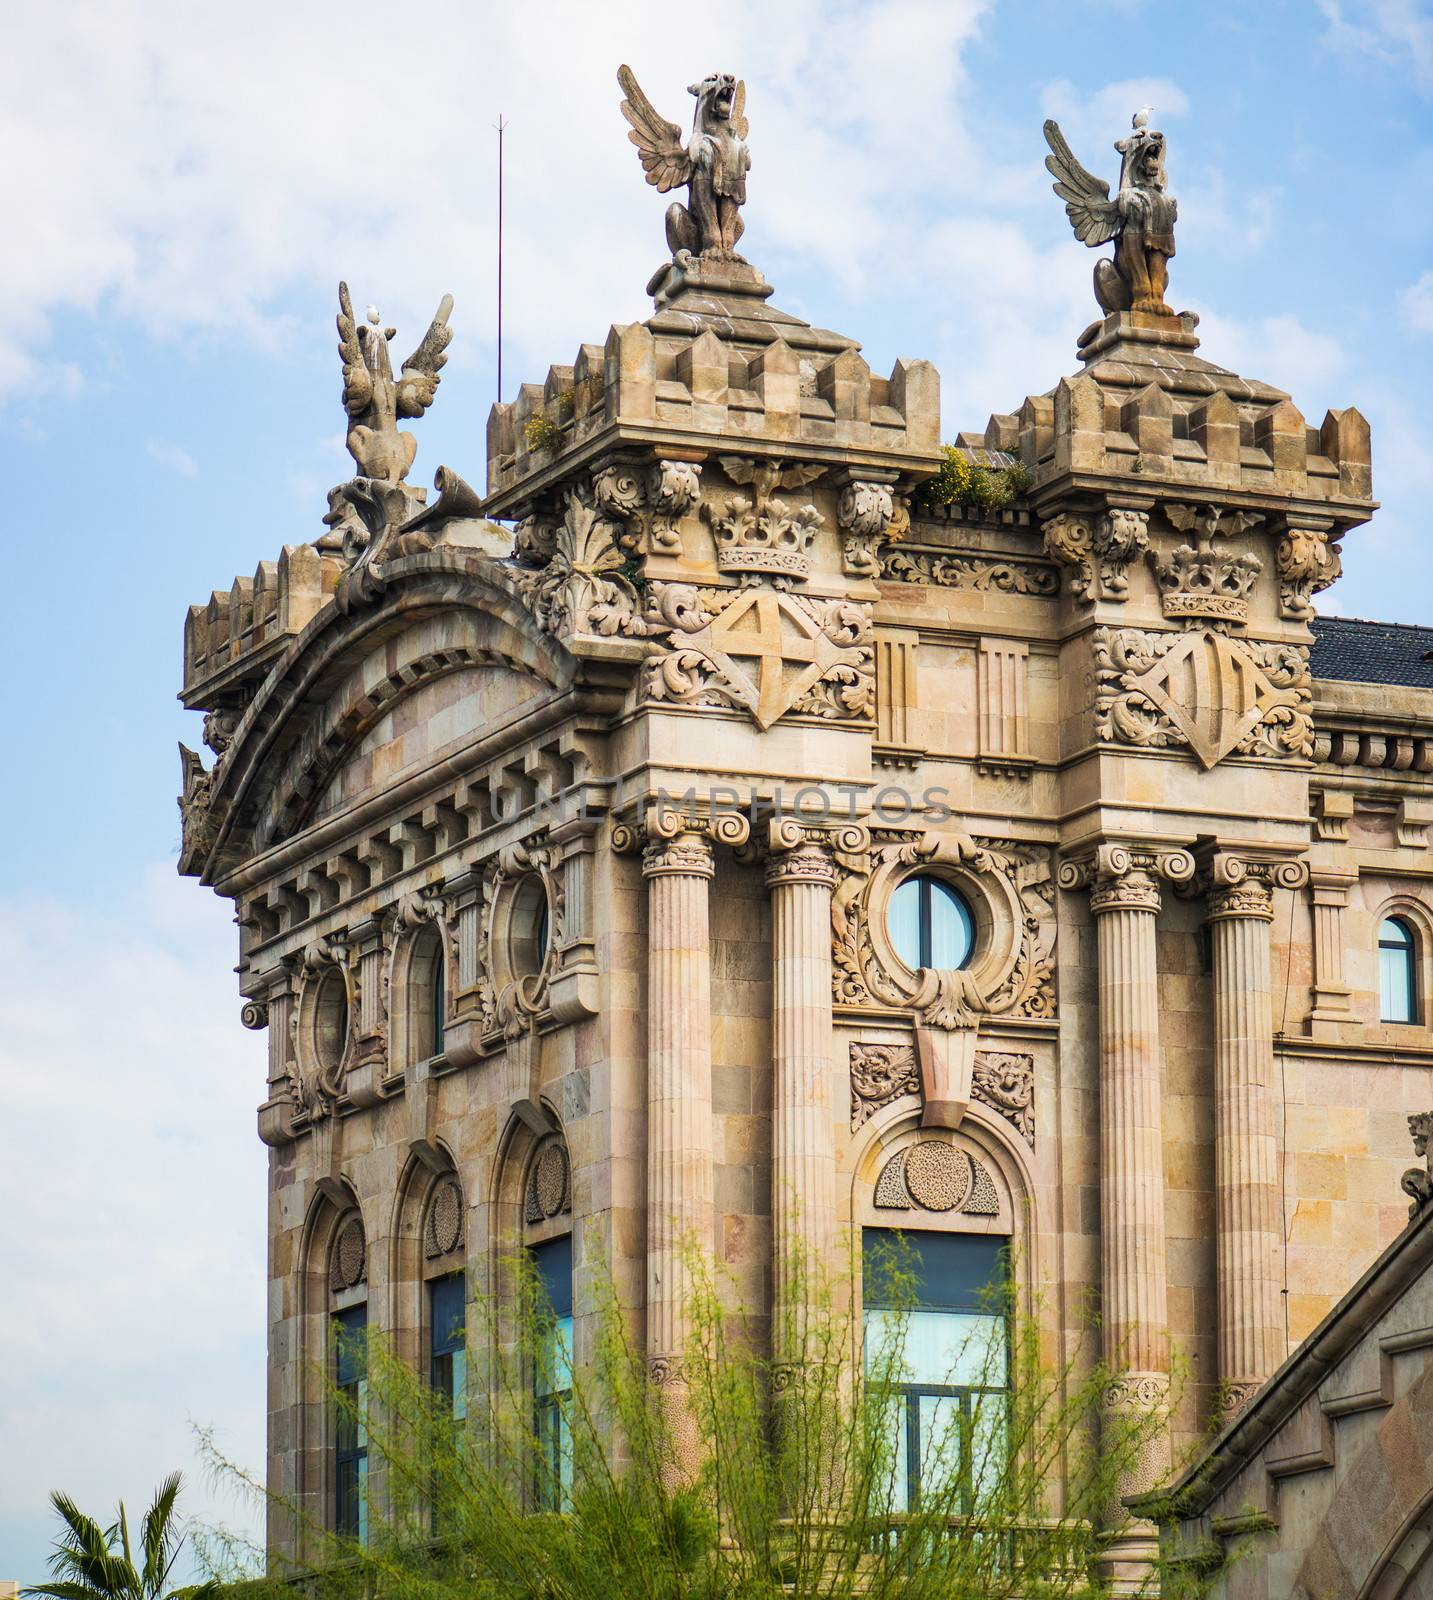 Maritime Station building in Barcelona